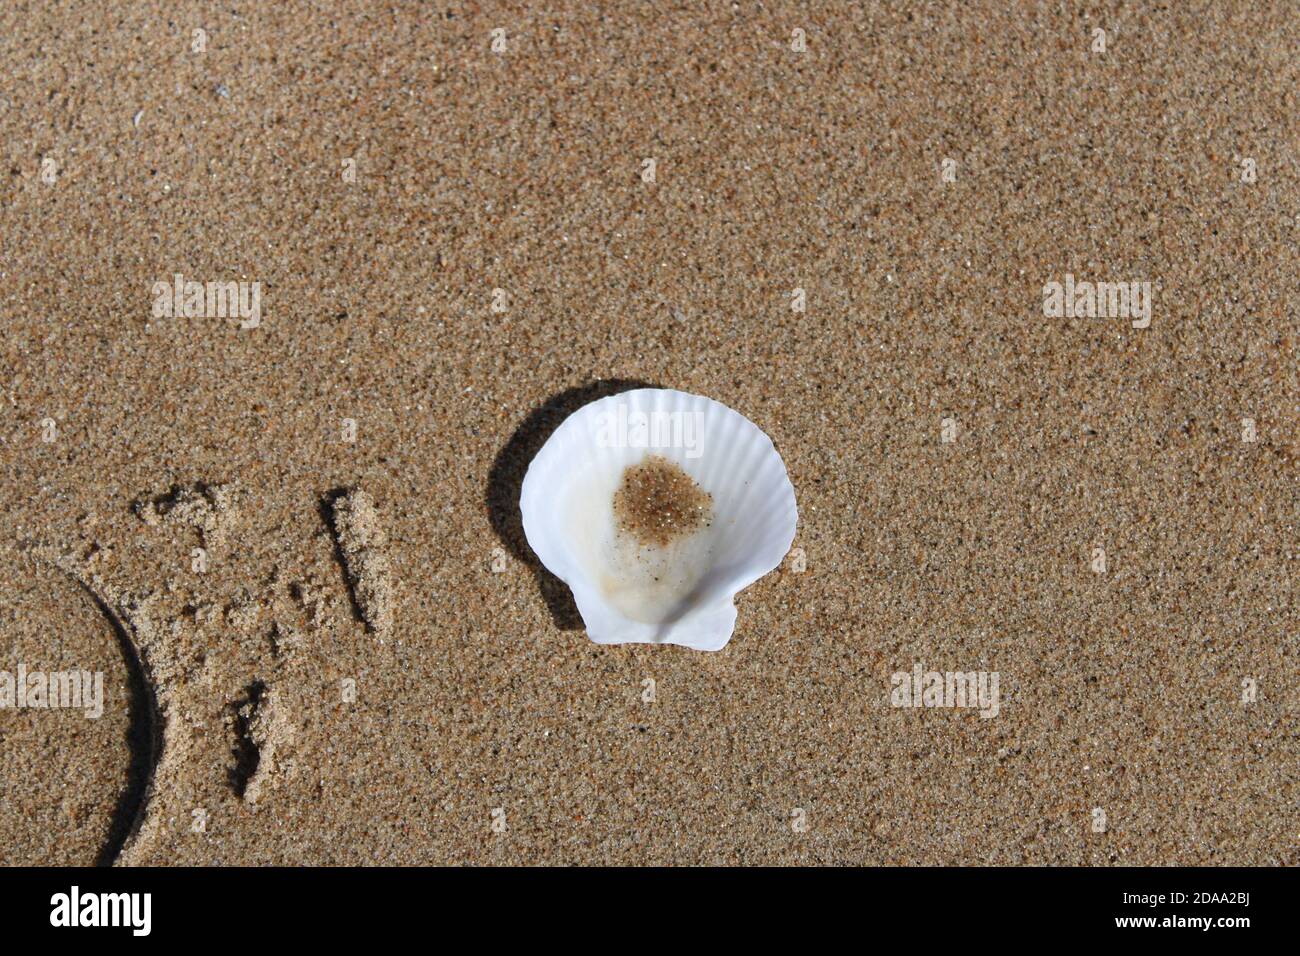 Bright white scallop shell isolated on a sandy beach Stock Photo